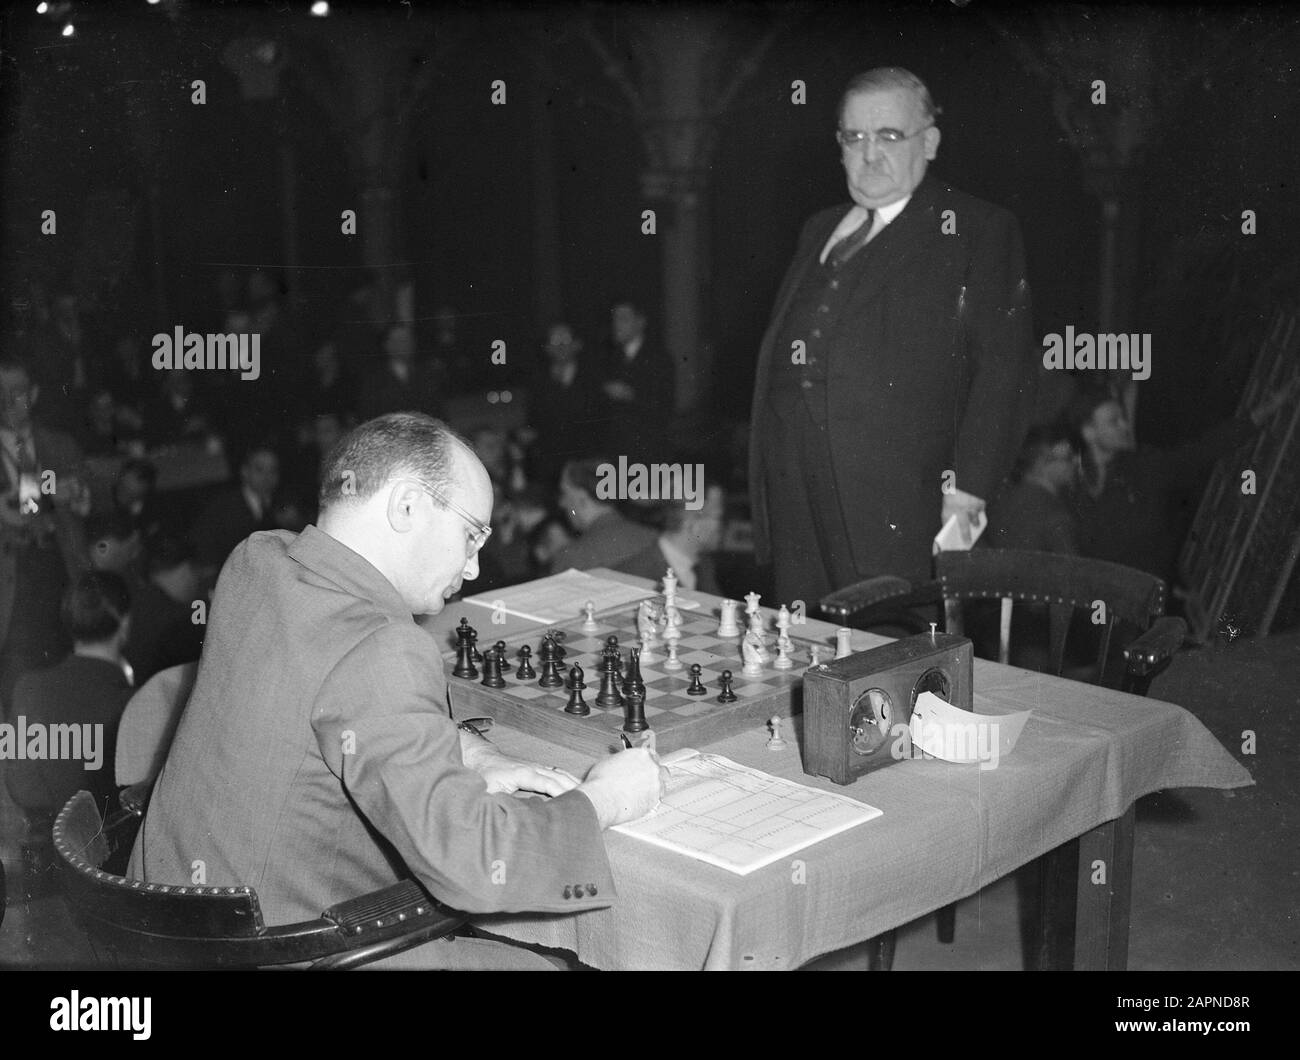 World Chess Championship. Samuel Reshevsky notes a move and competition  leader prof. dr. Vidmar watches Annotation: Location Grote Zaal Haagse  Zoological Date: 26 February 1948 Location: The Hague, Zuid-Holland  Keywords: chess, sport